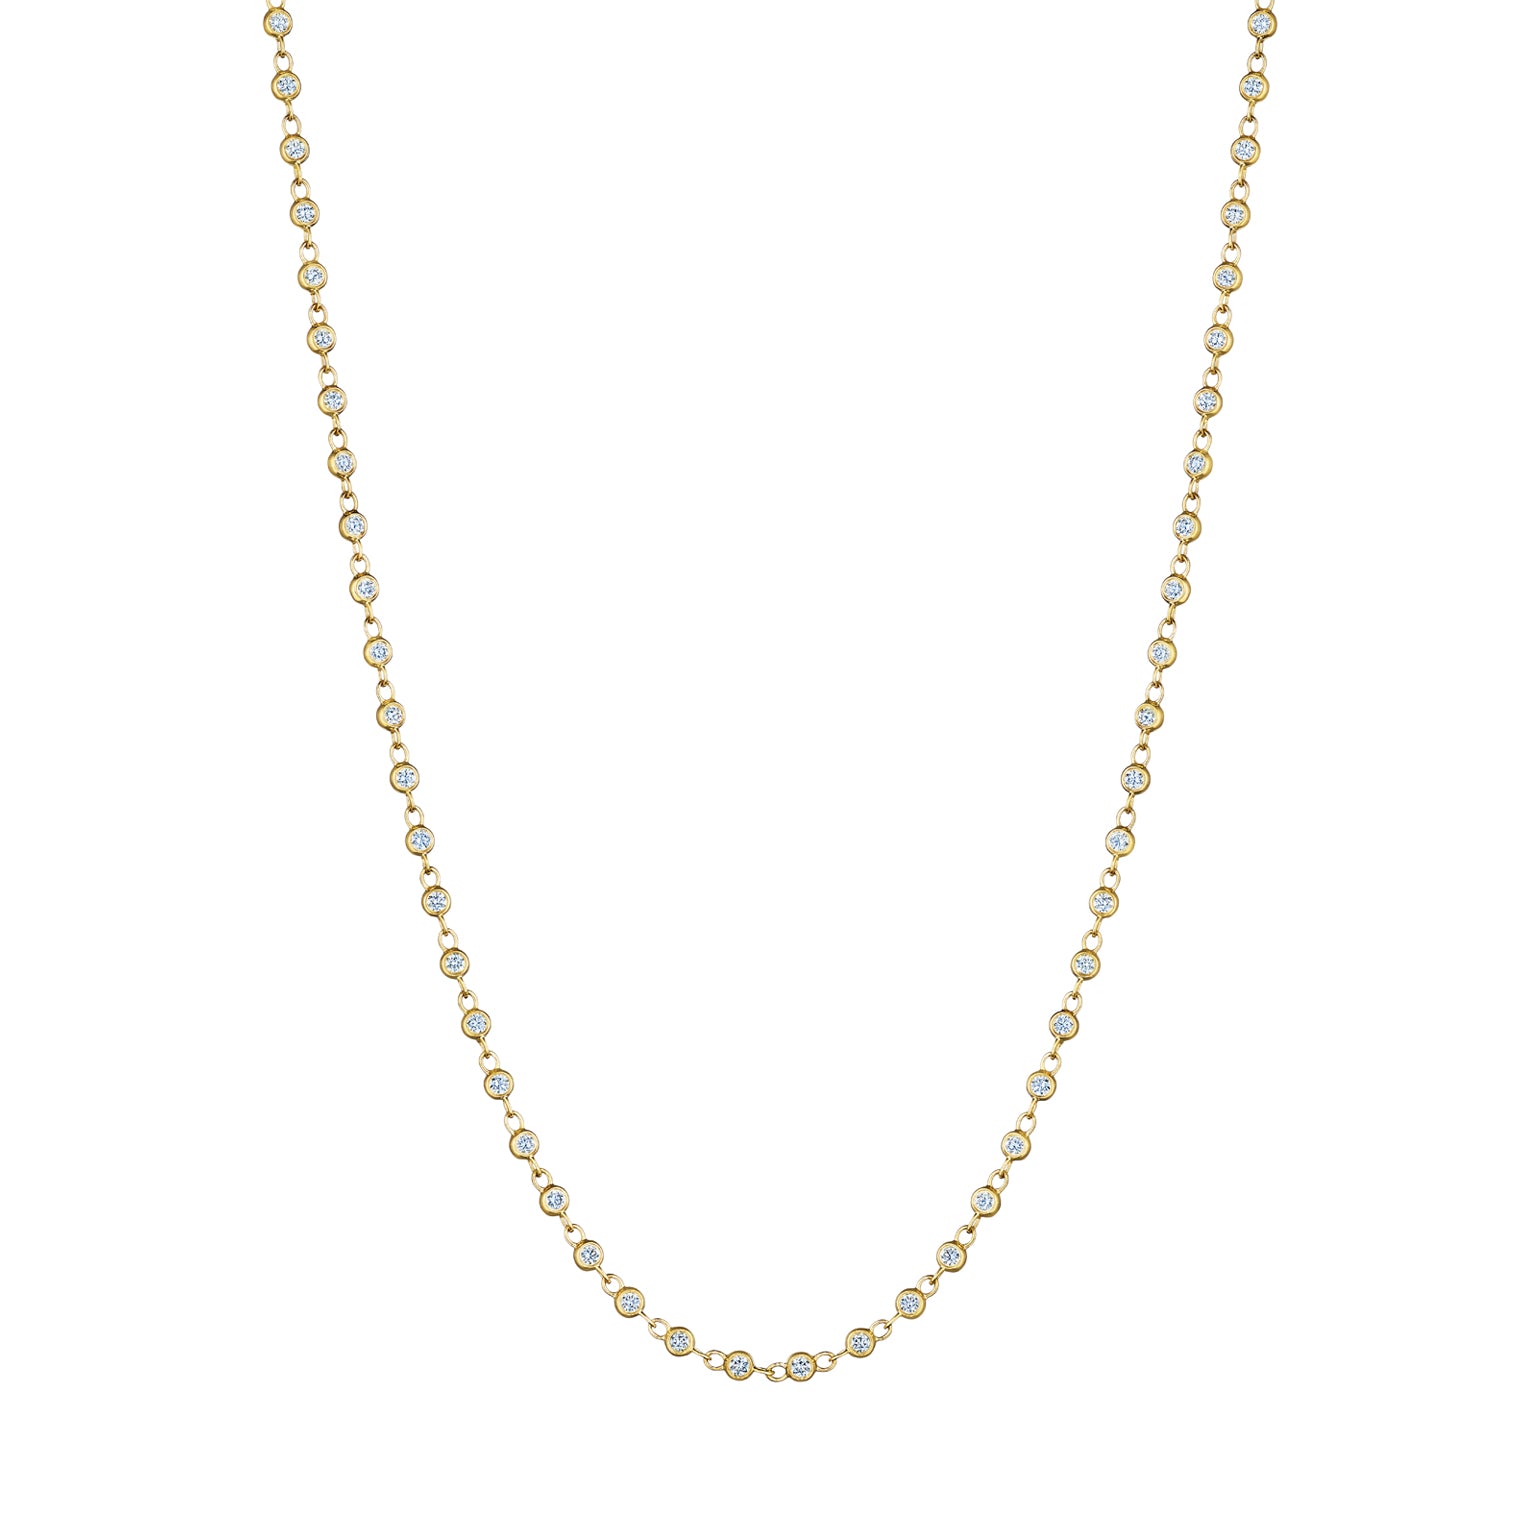 Golden Garland Necklace in Yellow Gold with Round Brilliant Diamonds